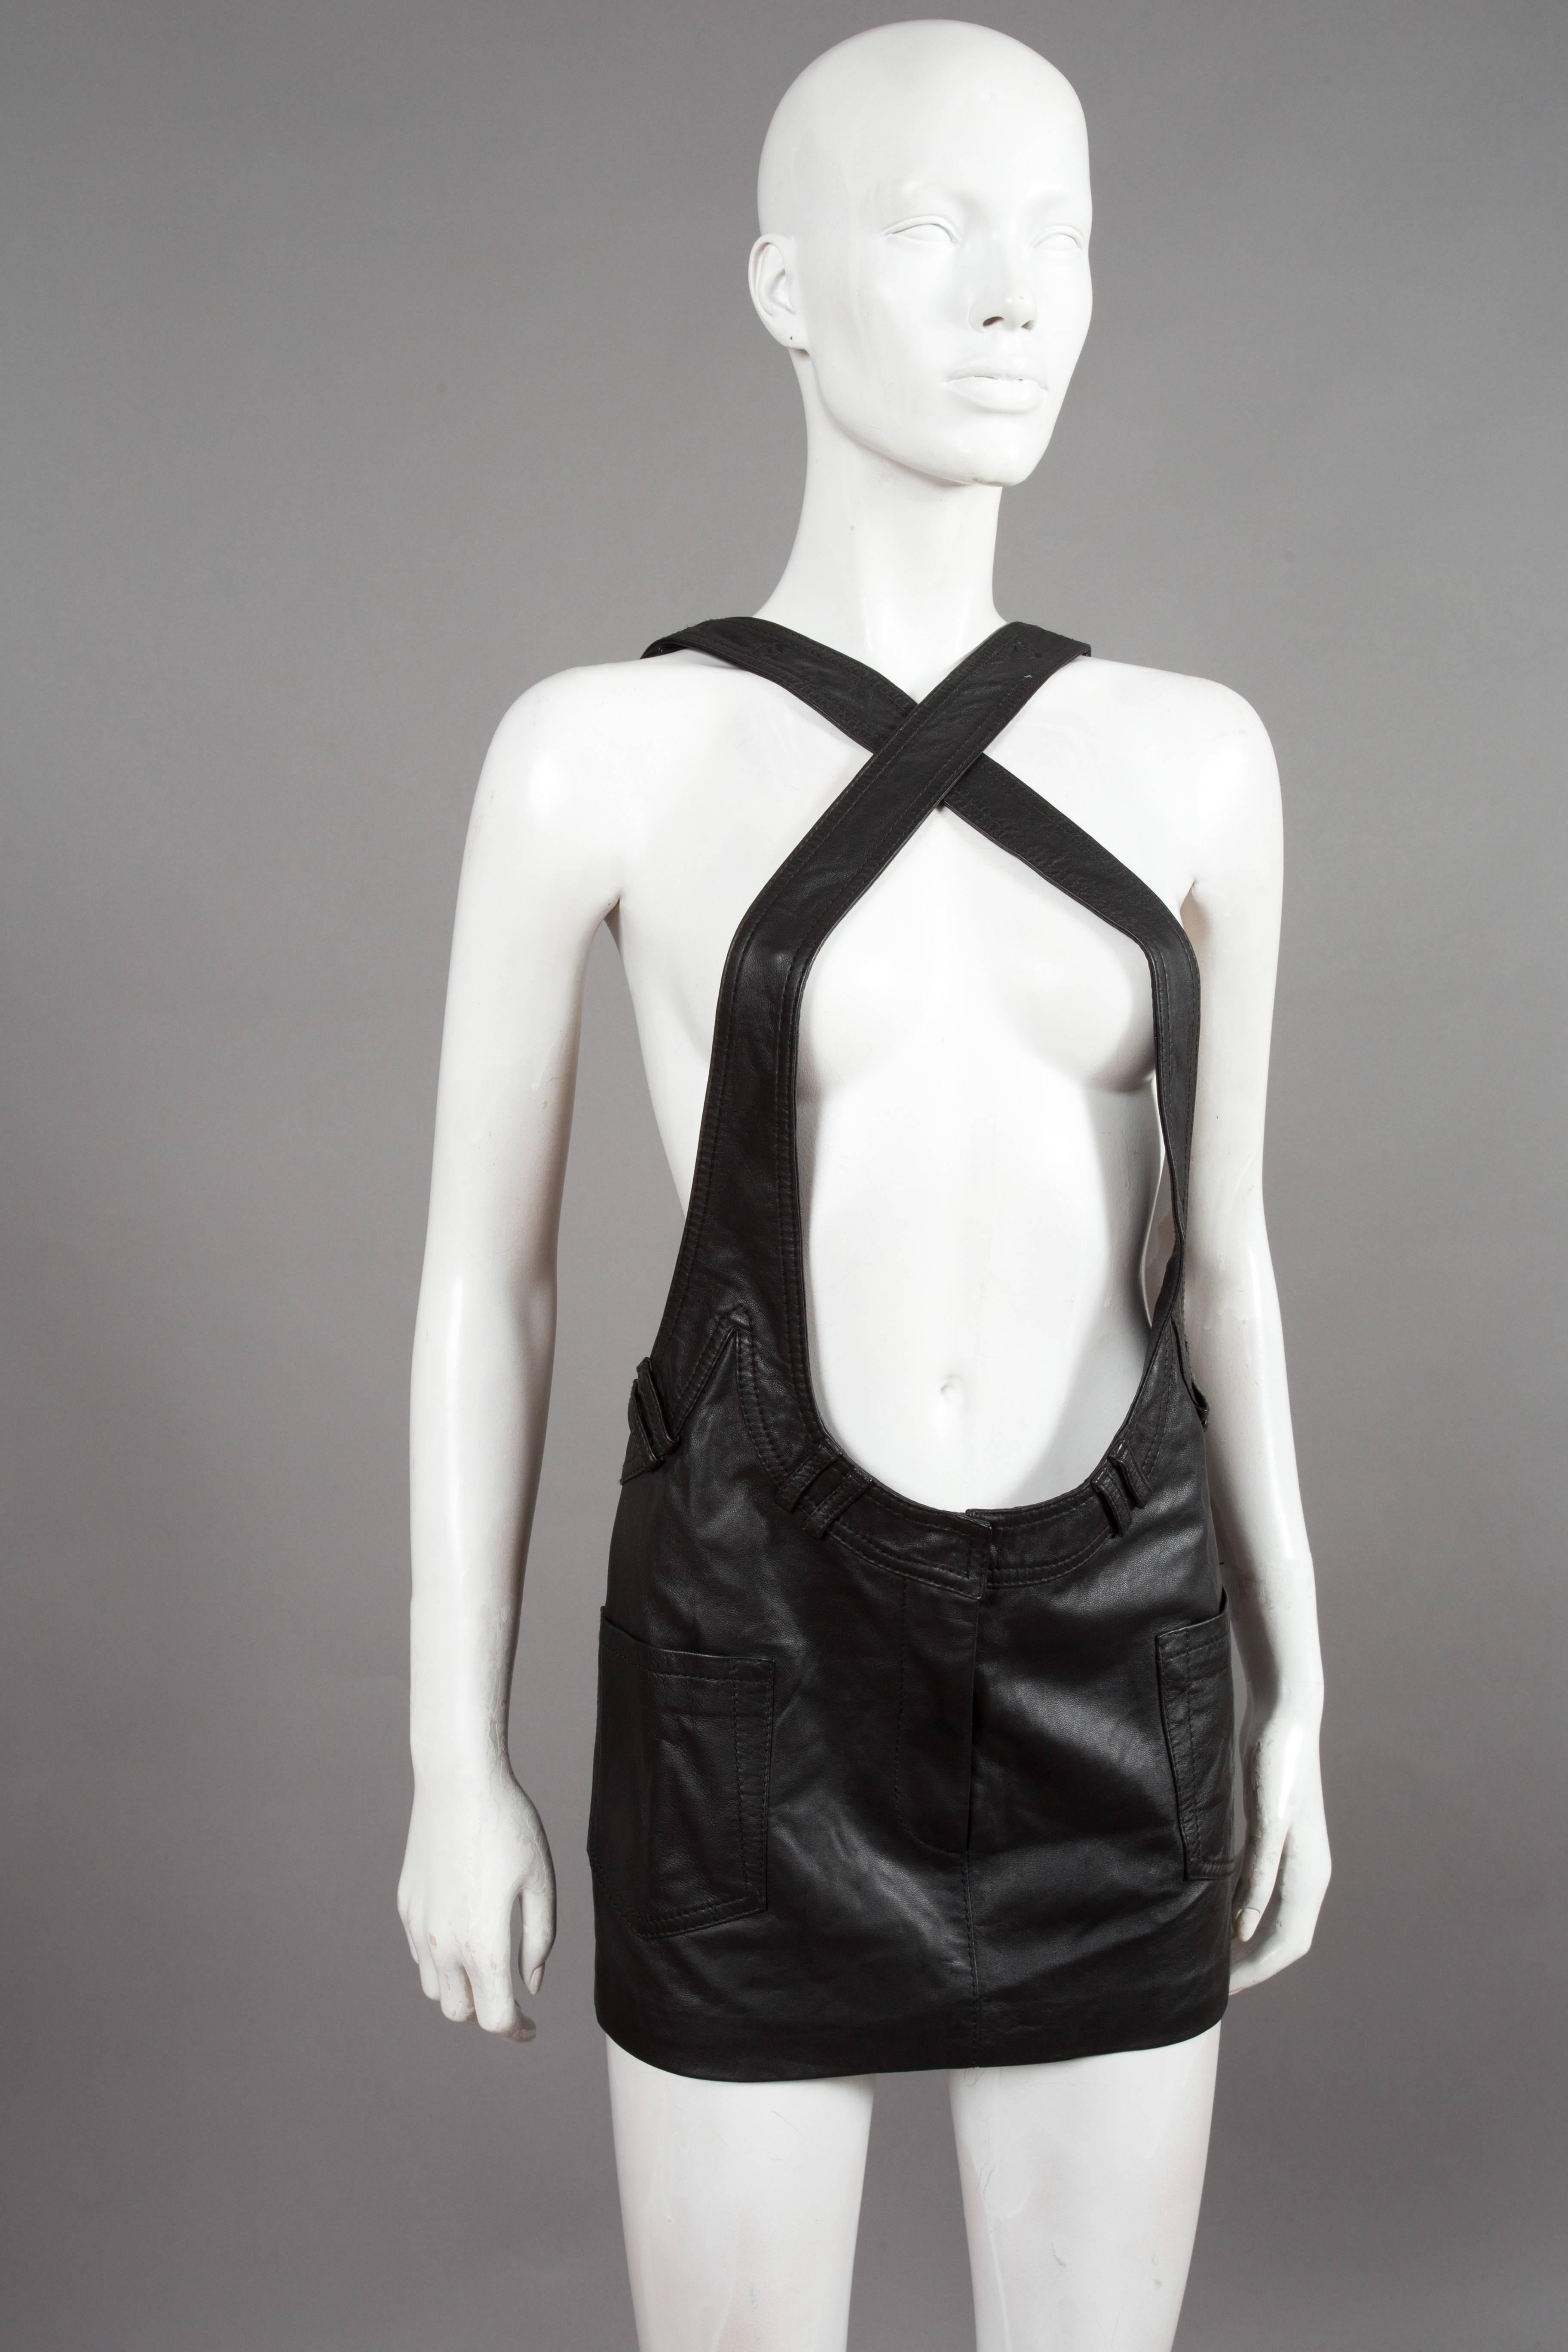 Alexander Wang black leather pinafore mini dress, spring/summer 2010 collection. The dress features adjustable cross-over shoulder straps with large snap button closures, two front open pockets, zip fly and 100% silk lining.

US 2  EU 34  UK 6  XS